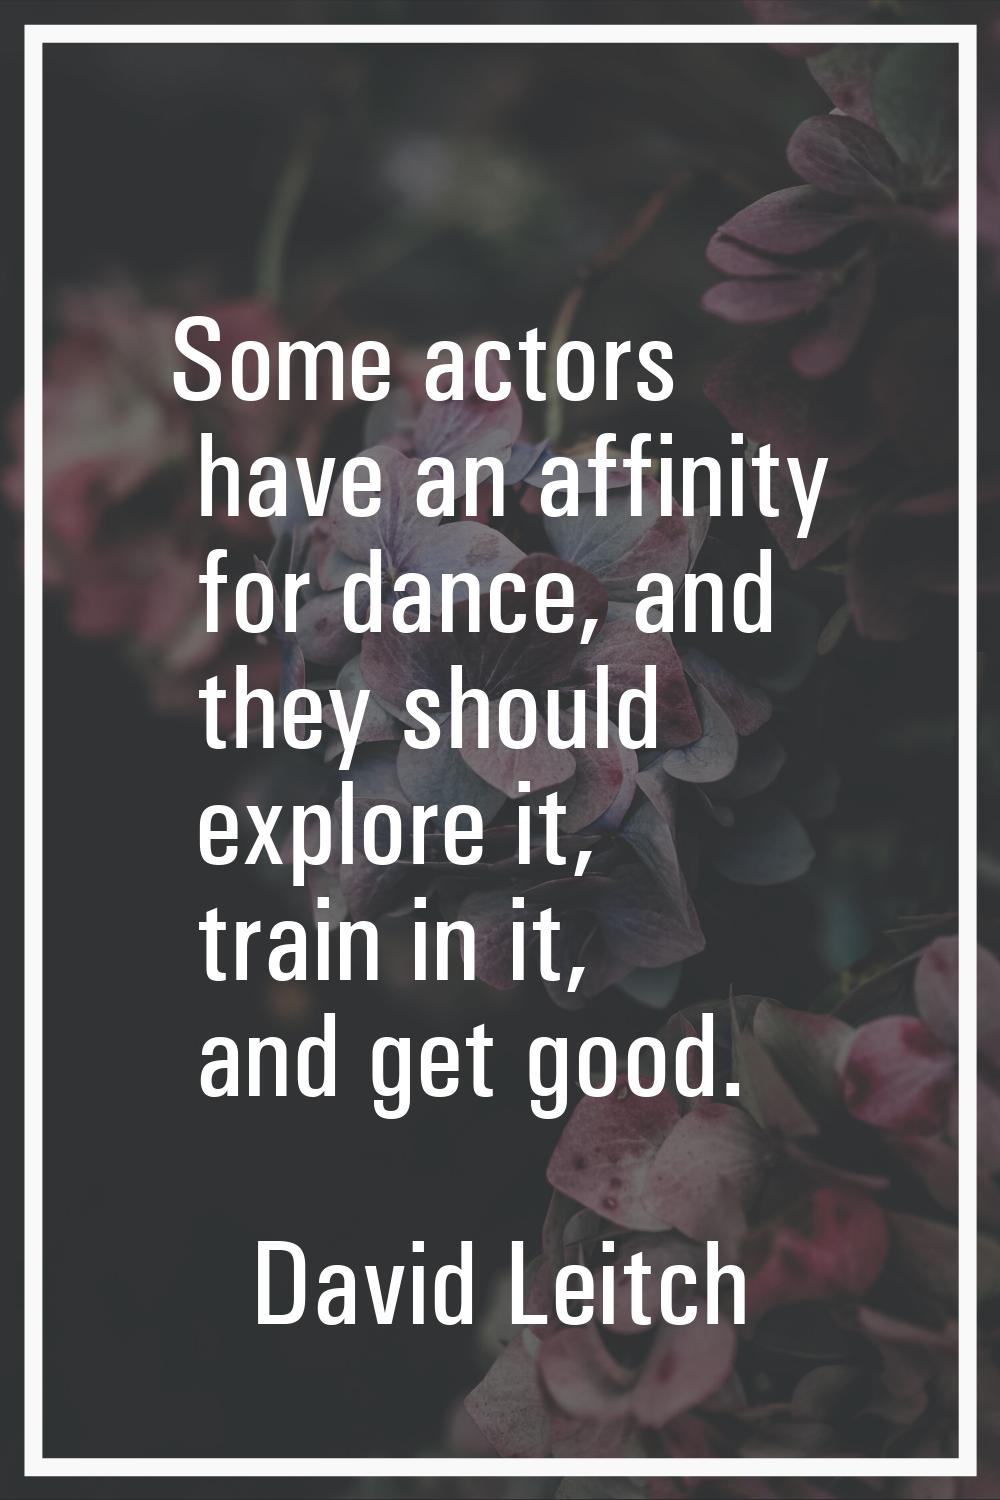 Some actors have an affinity for dance, and they should explore it, train in it, and get good.